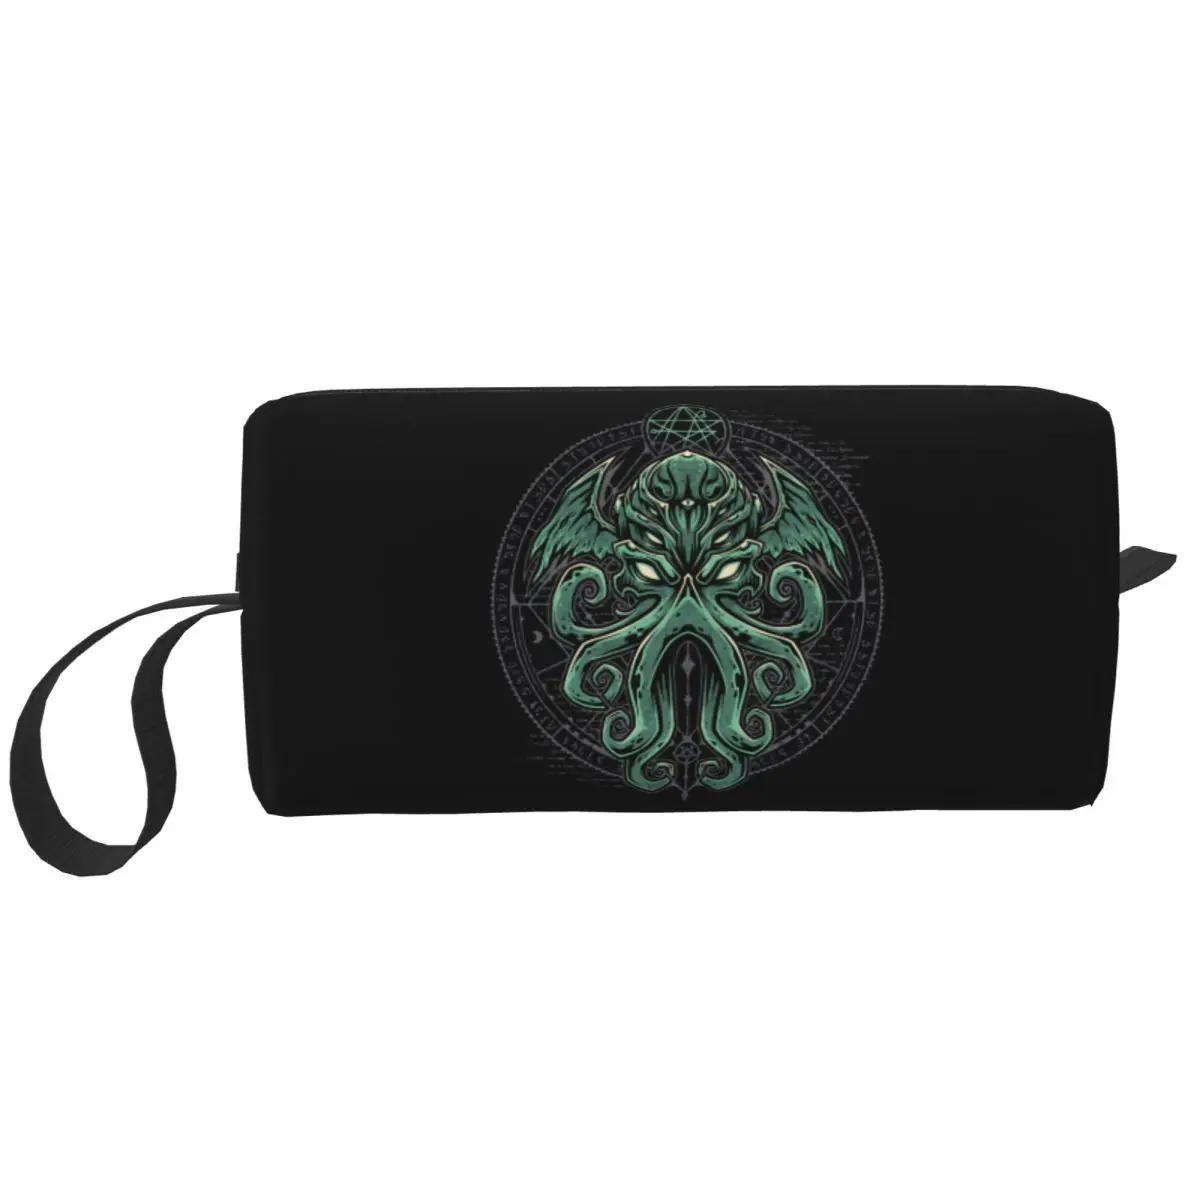 

Travel Great Cthulhu Toiletry Bag Cute Horror Movie Lovecraft Cosmetic Makeup Organizer for Women Beauty Storage Dopp Kit Case